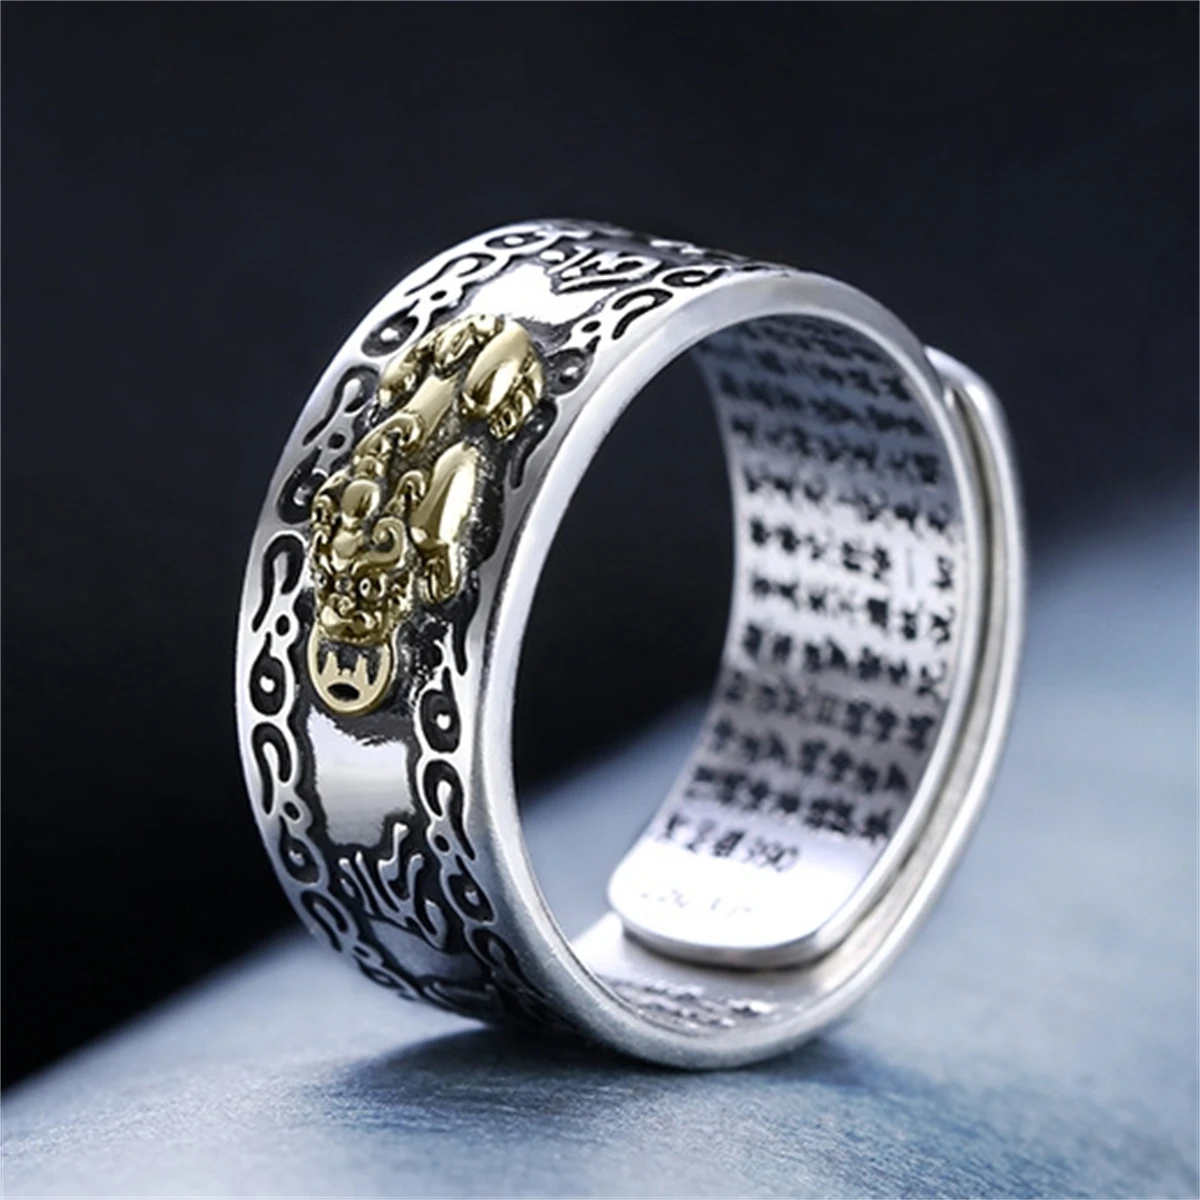 

Lucky Feng Shui Pixiu Ring Open Finger Ring Men Women Blessed Attract Wealth Jewelry Gift